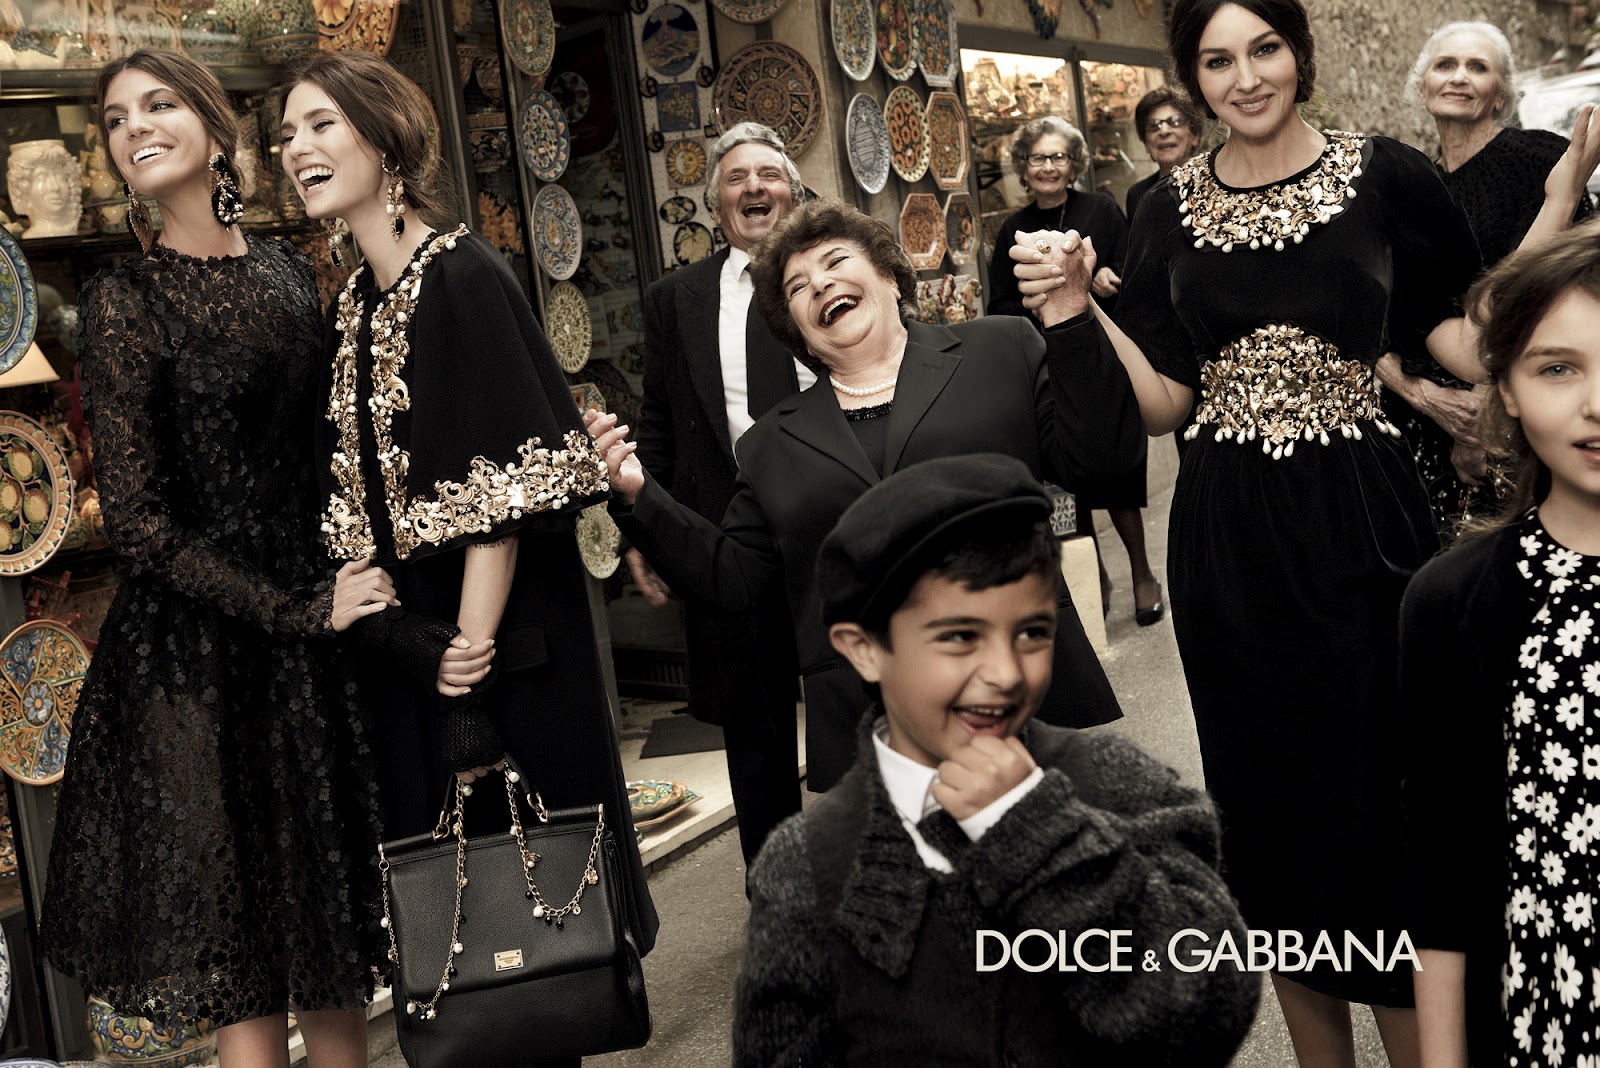 For the love of fashion: Dolce & Gabanna AD CAMPAIGN for AW 2013